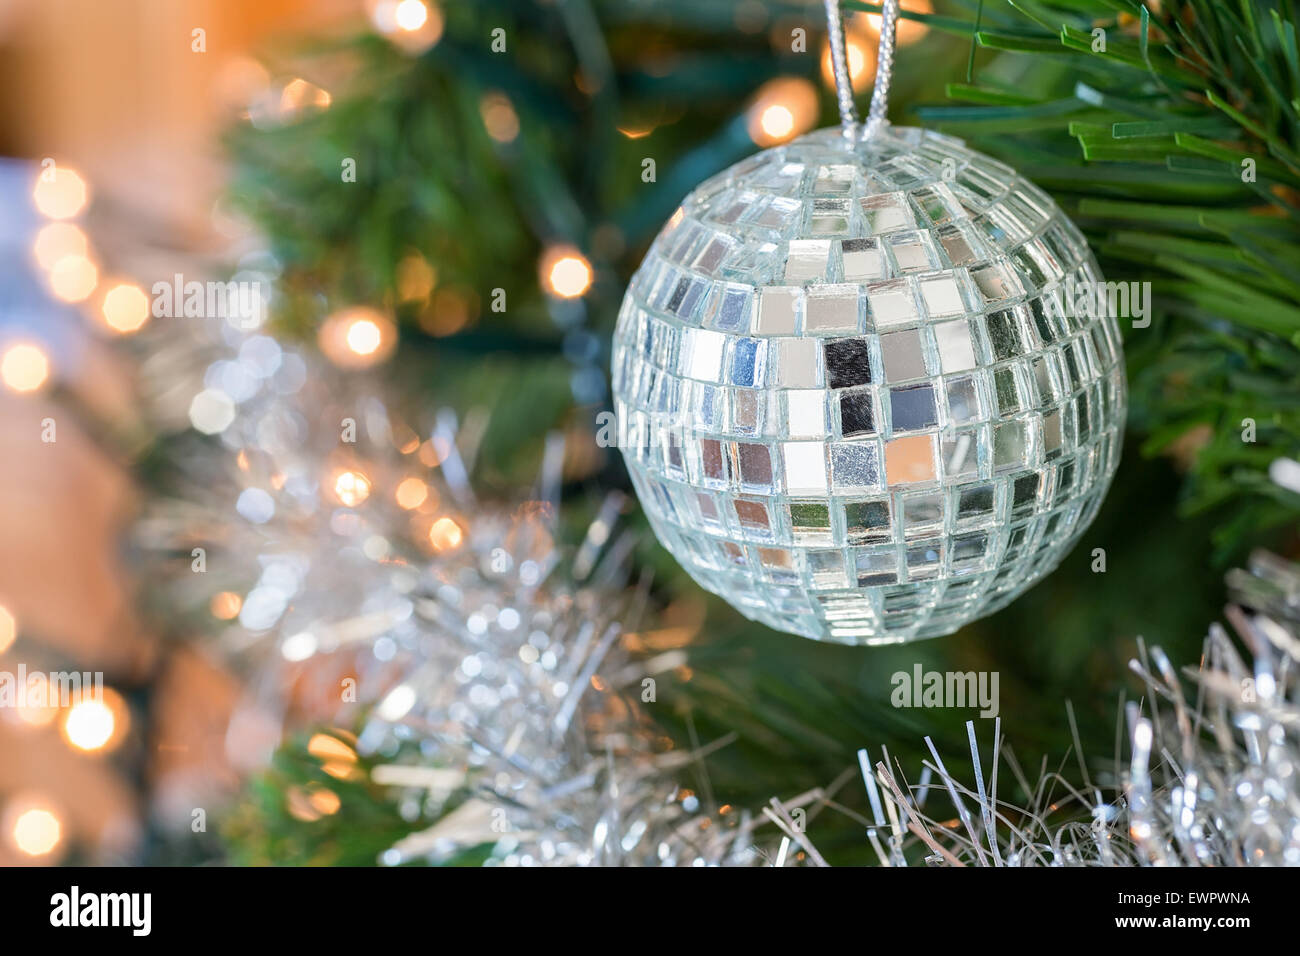 Christmas ball or bauble with little mirrors as decoration hanging in tree Stock Photo